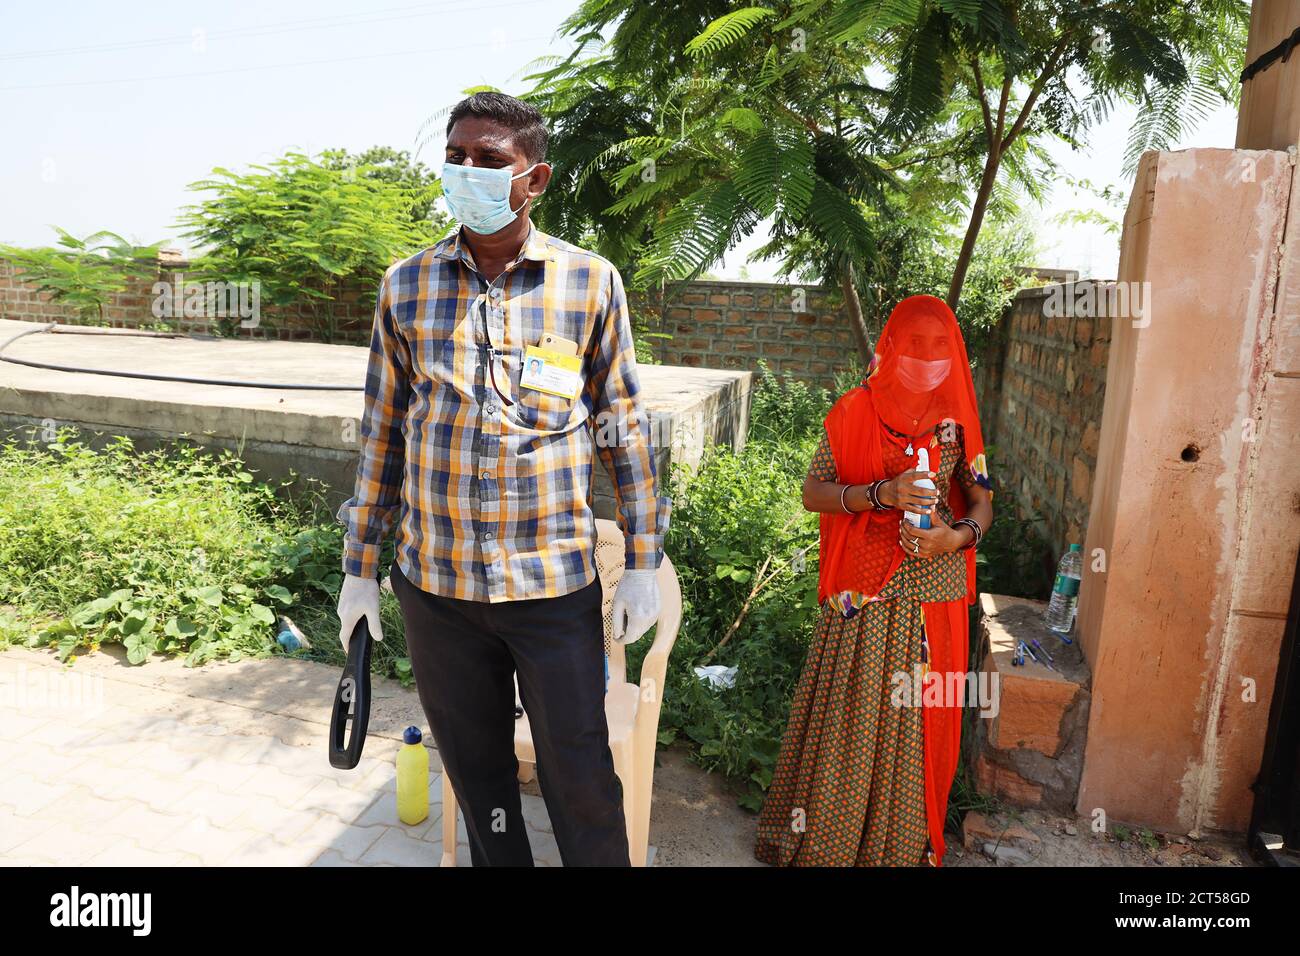 Jodhpur, Rajasthan, India, September 13,2020: Seutiry guard with metal detector and woman with sanitizer wearing mask standing at school entrance wait Stock Photo